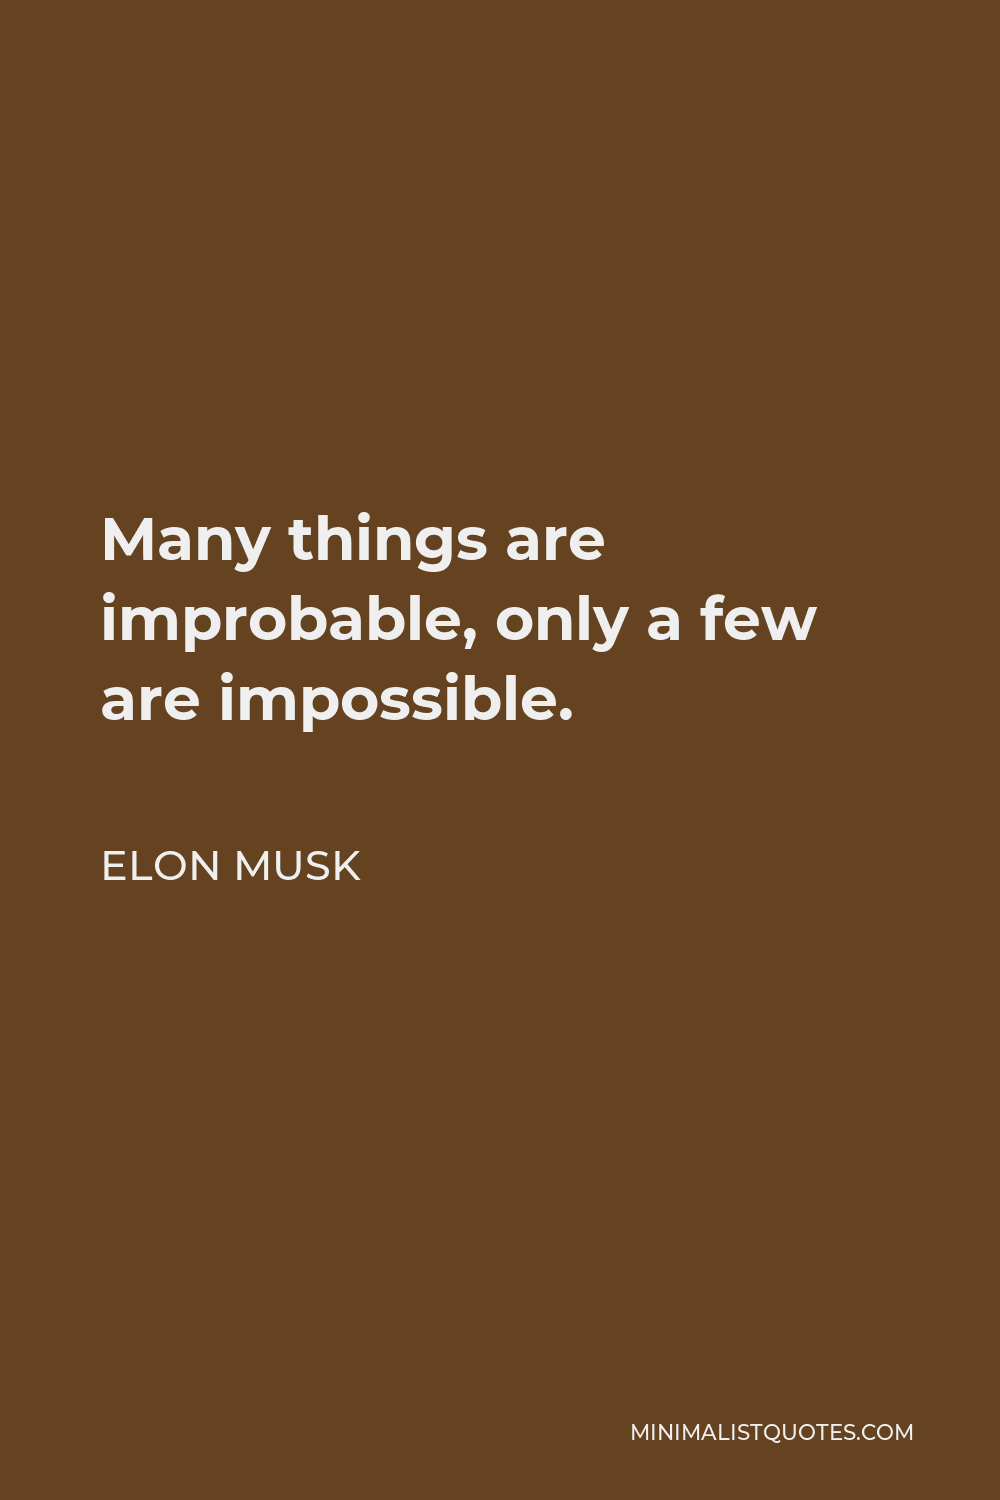 Elon Musk Quote - Many things are improbable, only a few are impossible.